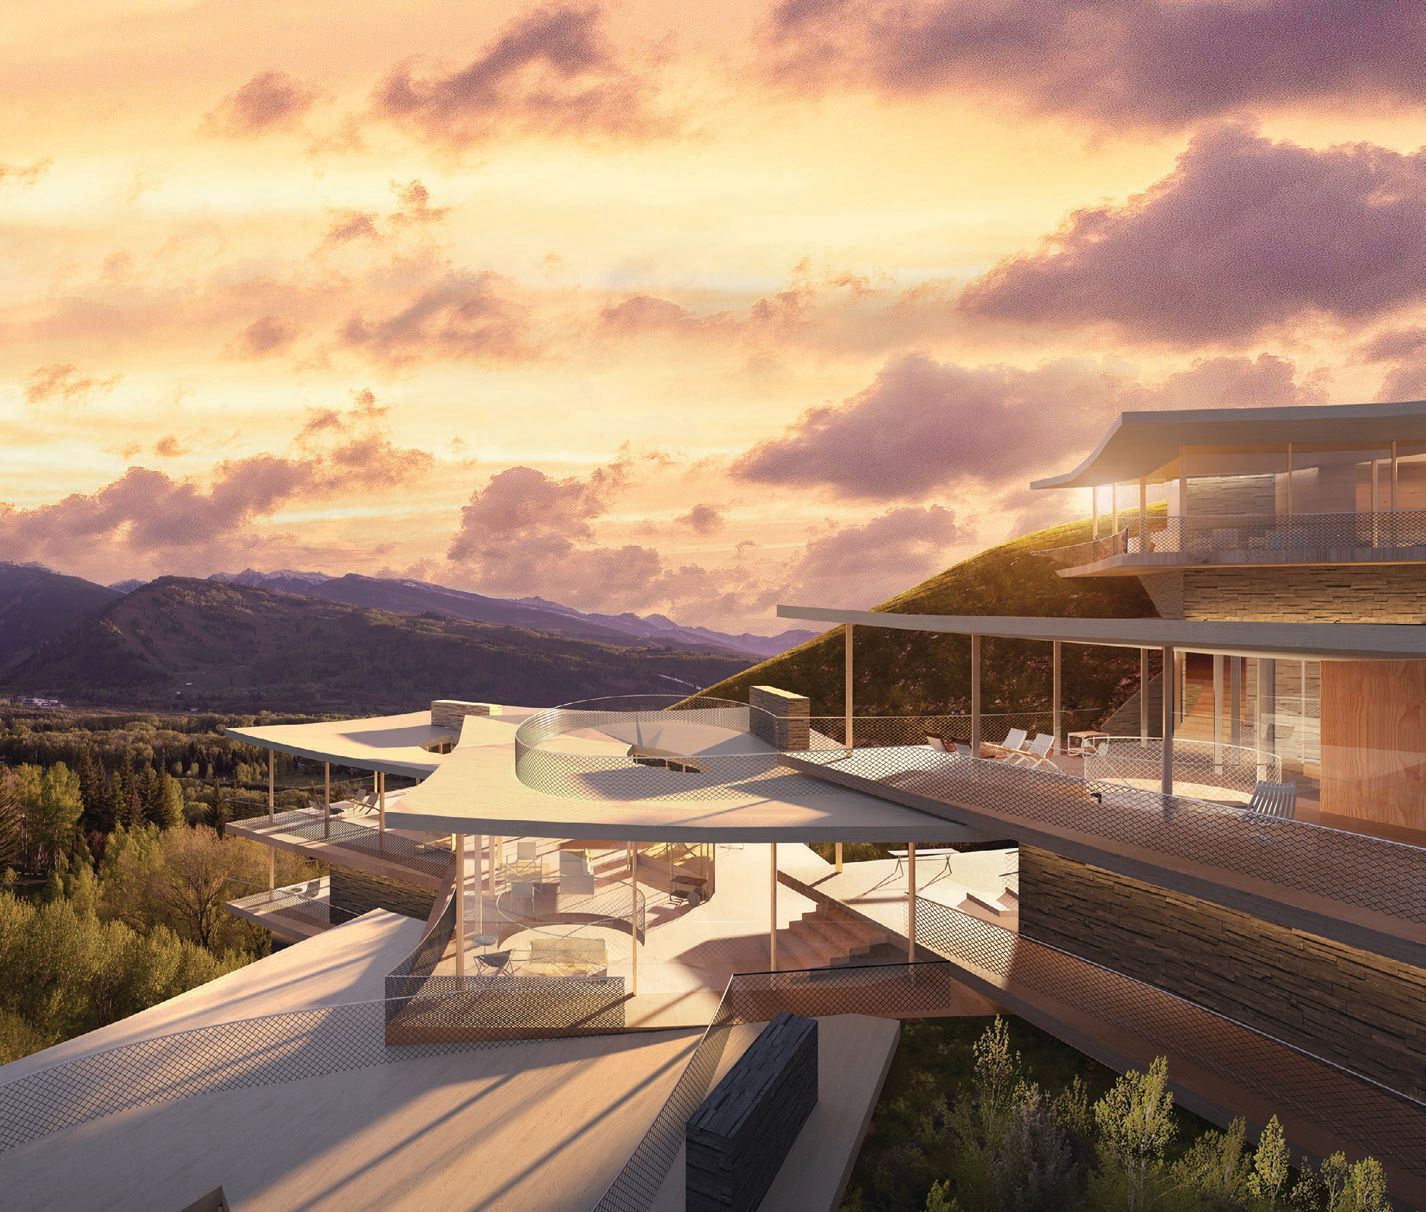 Feast your eyes on renderings of Risingmountain, Compass’ latest interior wonder in Aspen. RENDERING COURTESY OF THE BRAND